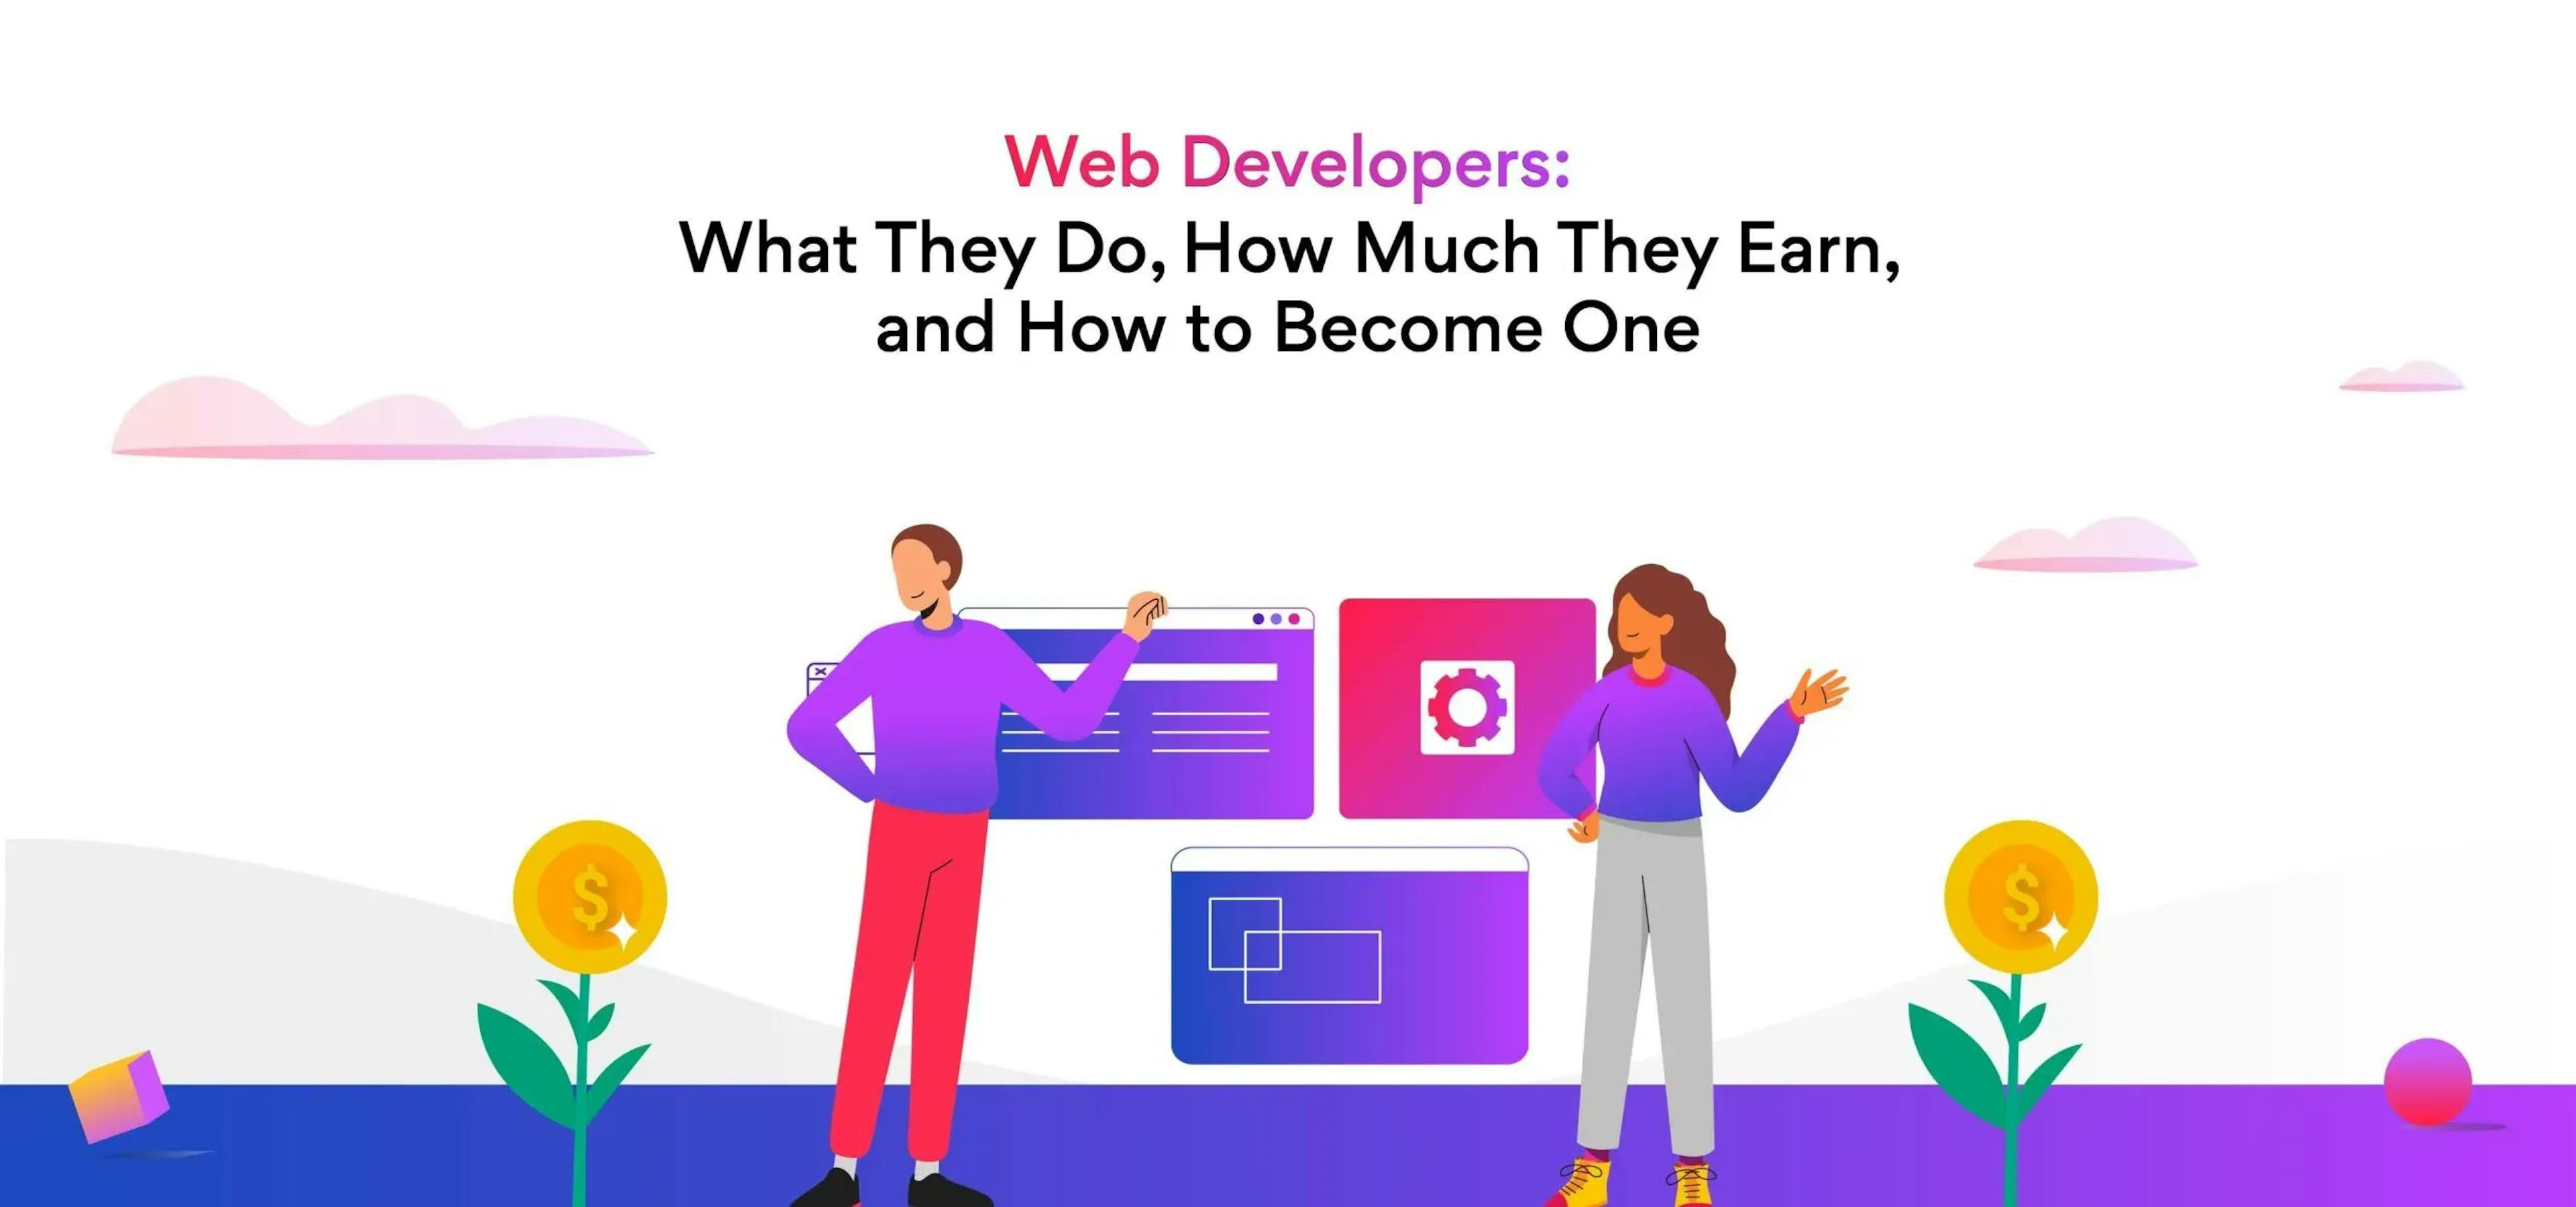 Web Developers: What They Do, How Much They Earn, and How to Become One